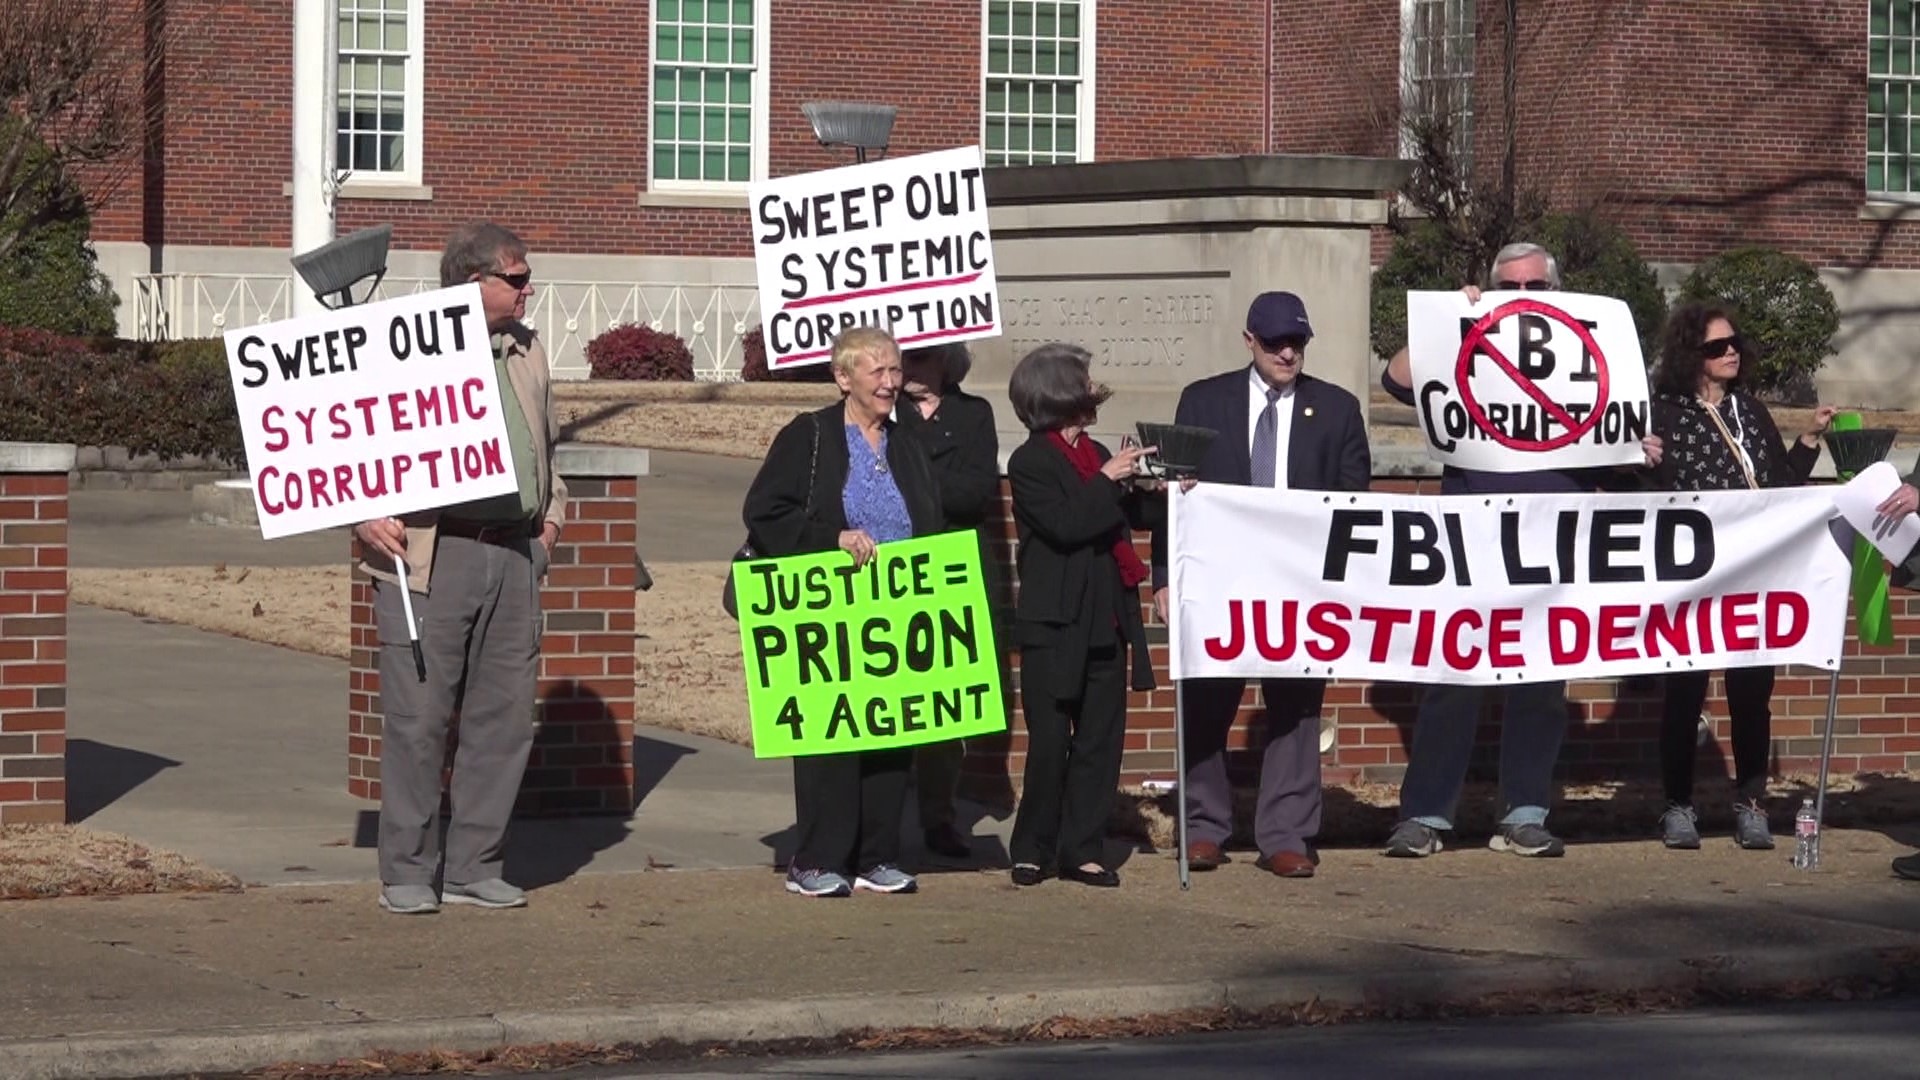 Fort Smith citizens protest outside the courthouse where a former FBI Agent will be sentenced for evidence destruction in an Arkansas State Senator's corruption case